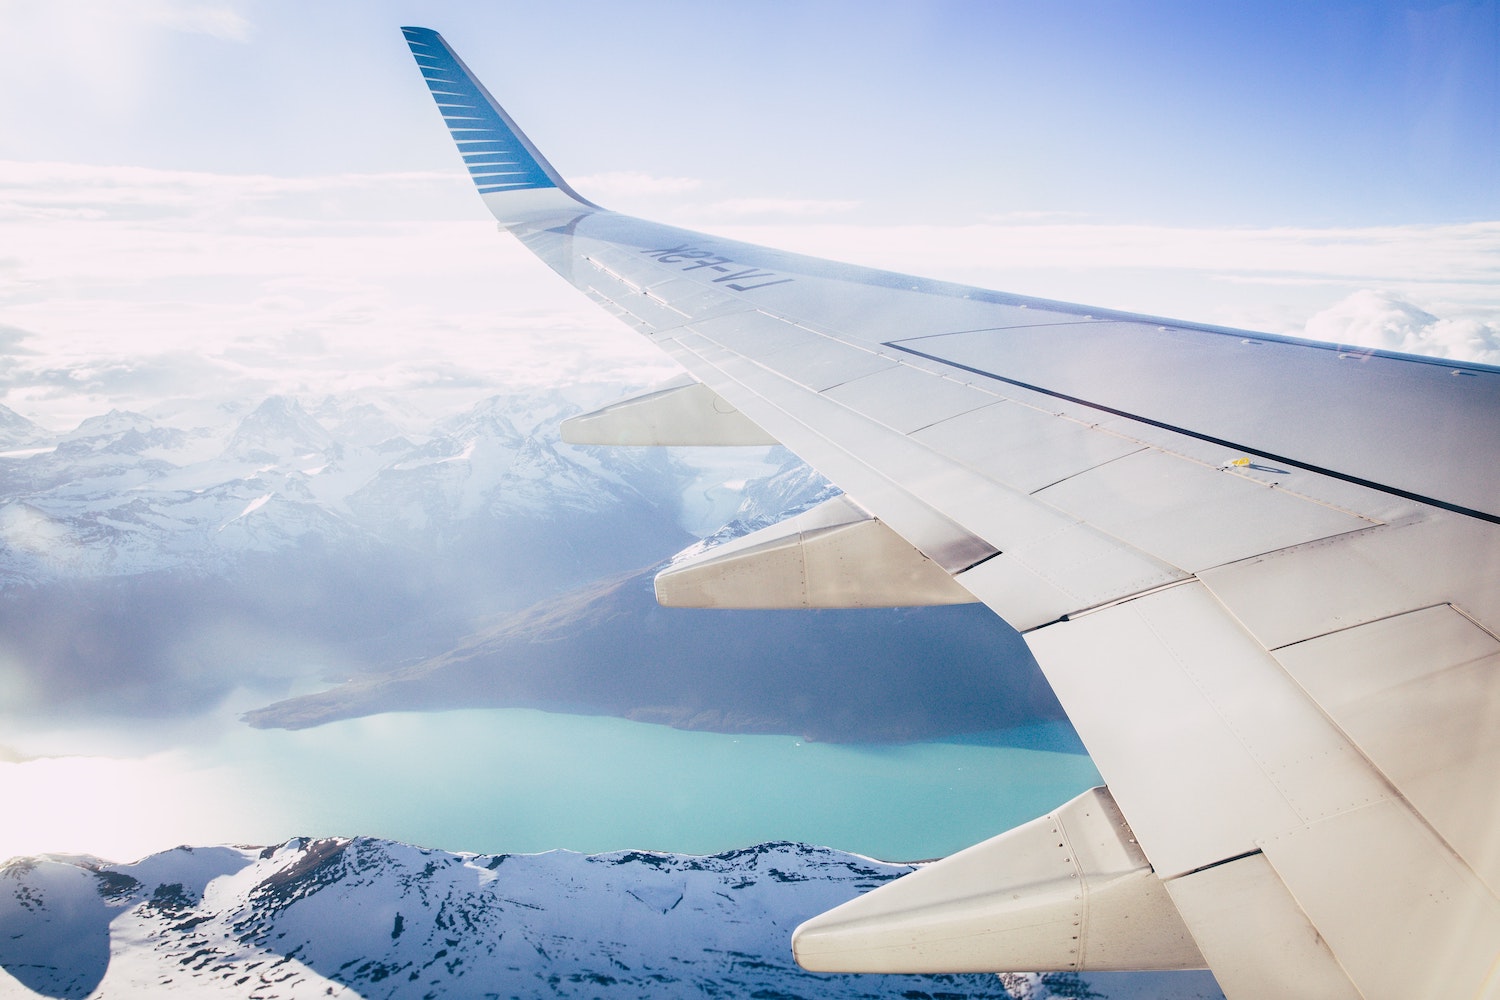 A plane wing. COVID-19 Pandemic era flights are relatively low risk. | Margo Brodowicz via Unsplash